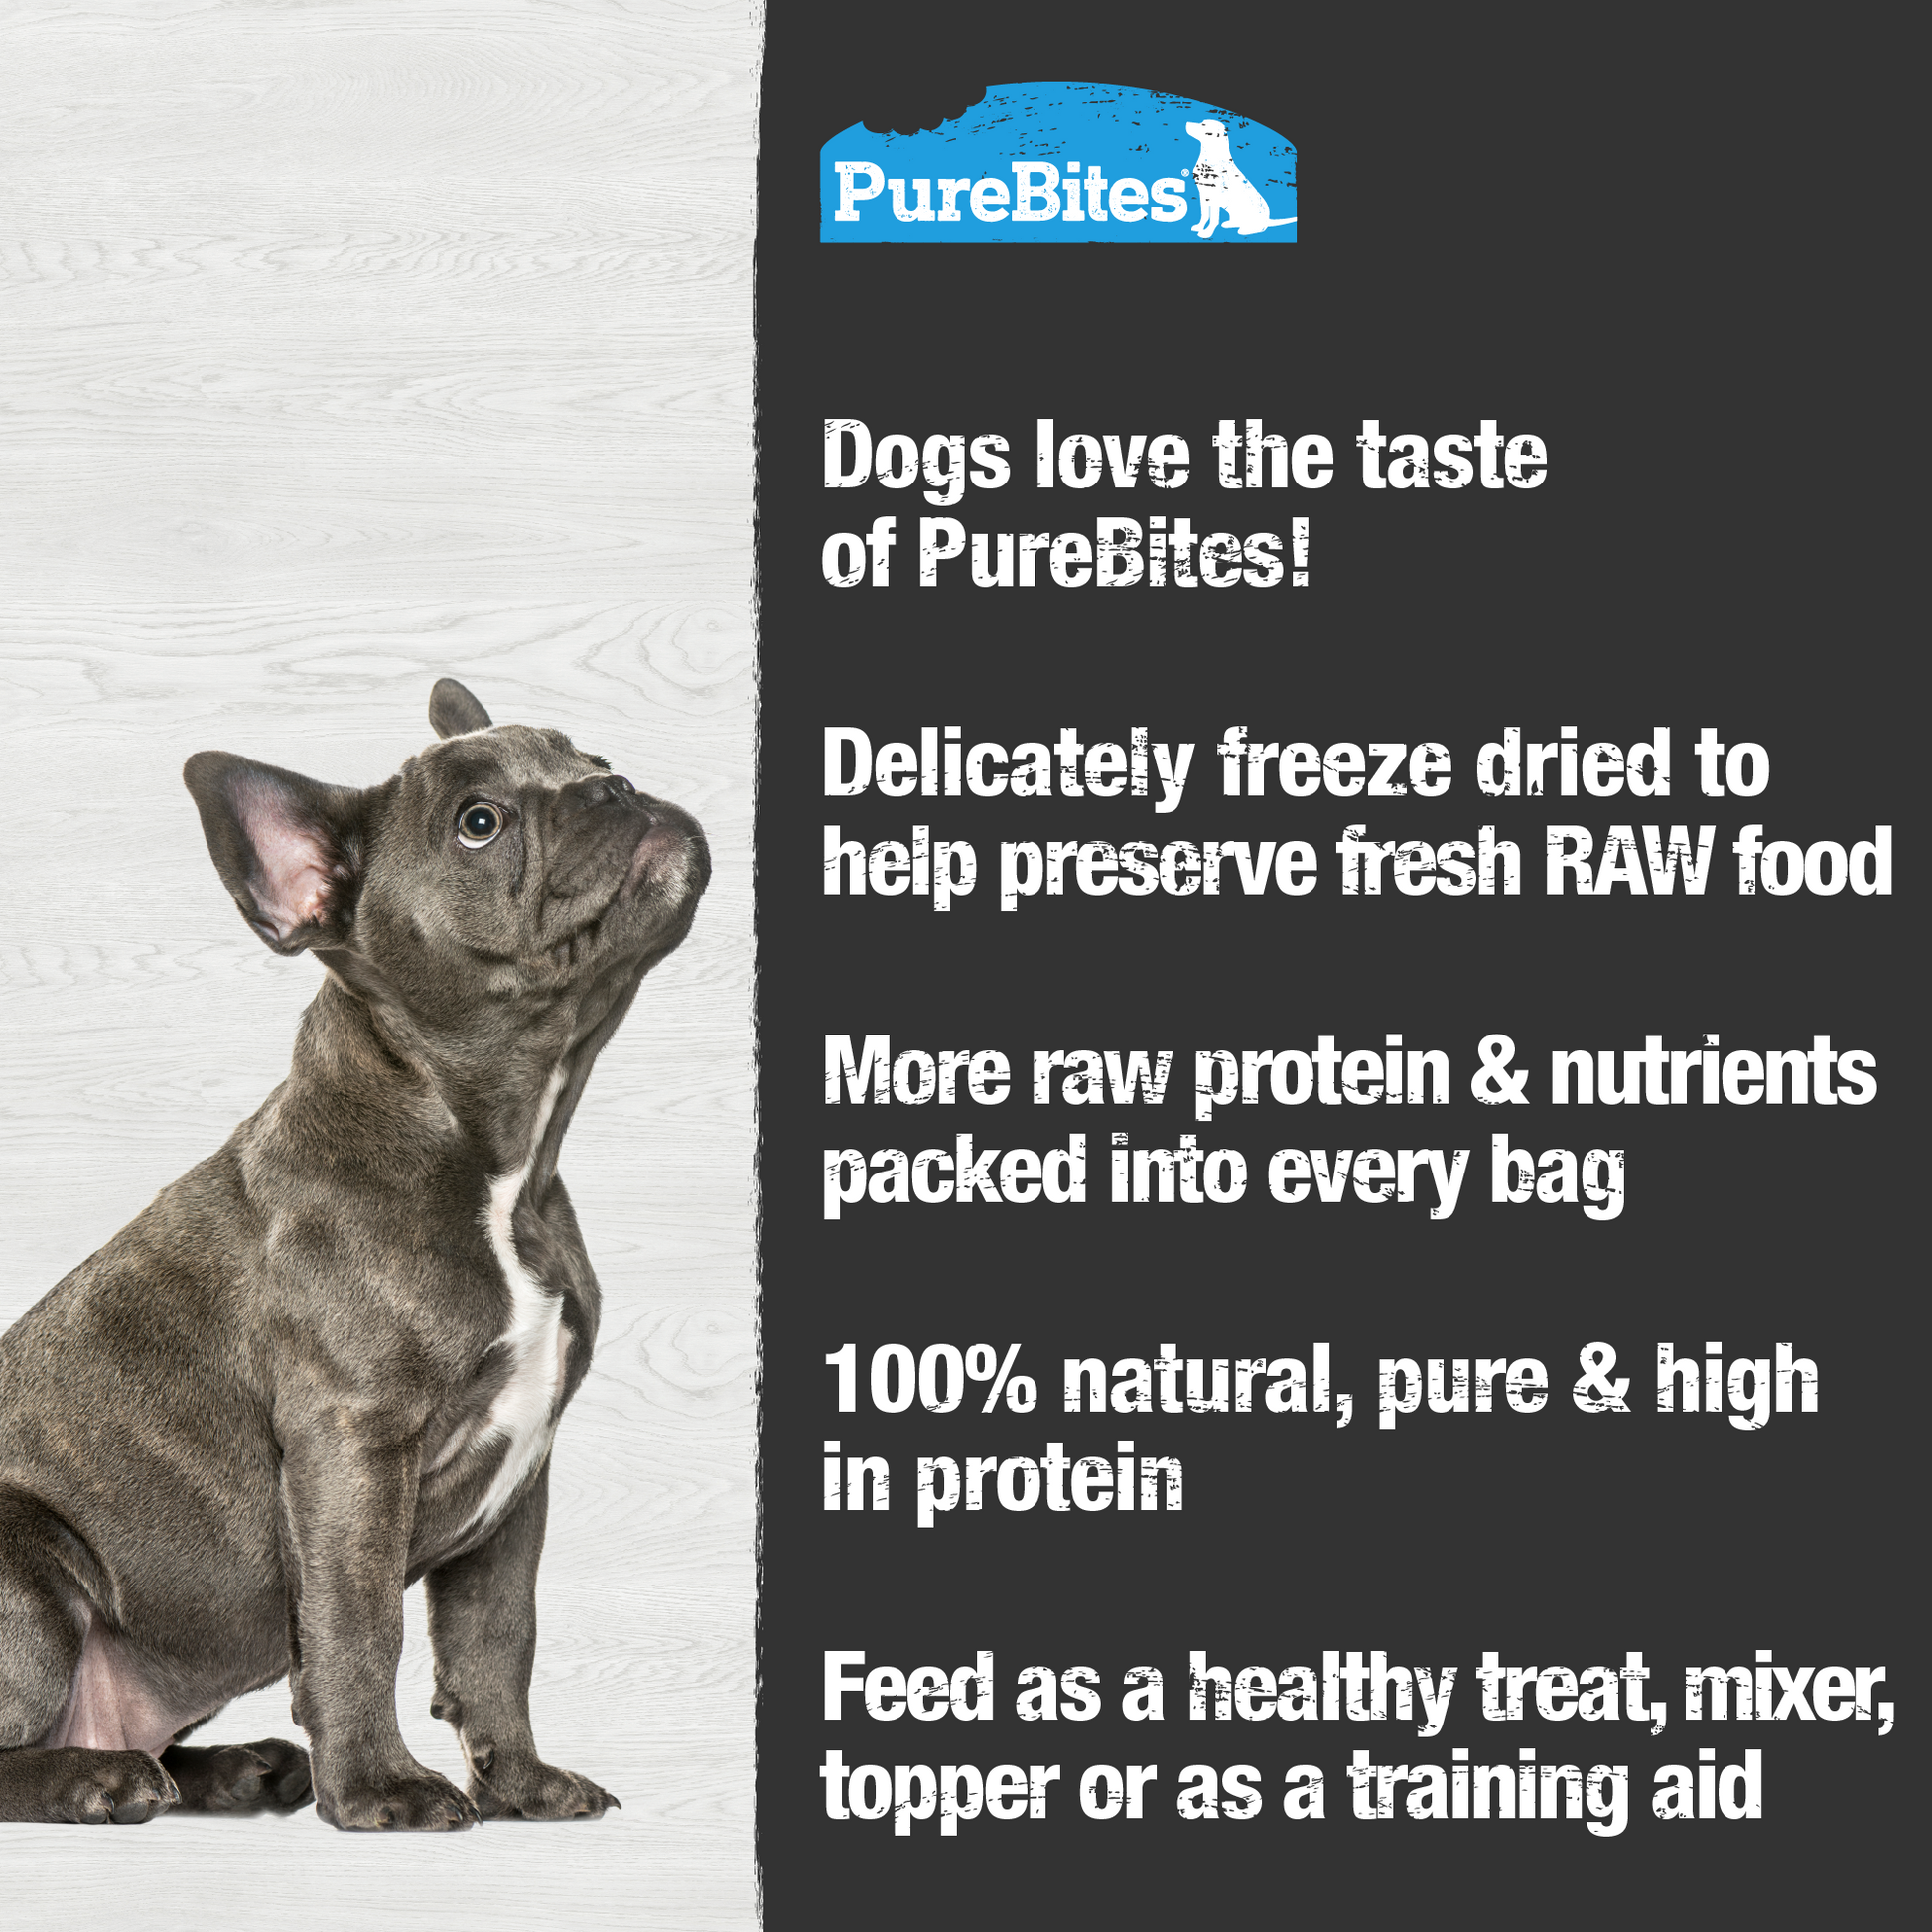 Made fresh & pure means more RAW protein and nutrients packed into every bag. Our lamb liver is freeze dried to help preserve its RAW taste, and nutrition, and mirror a dog’s ancestral diet